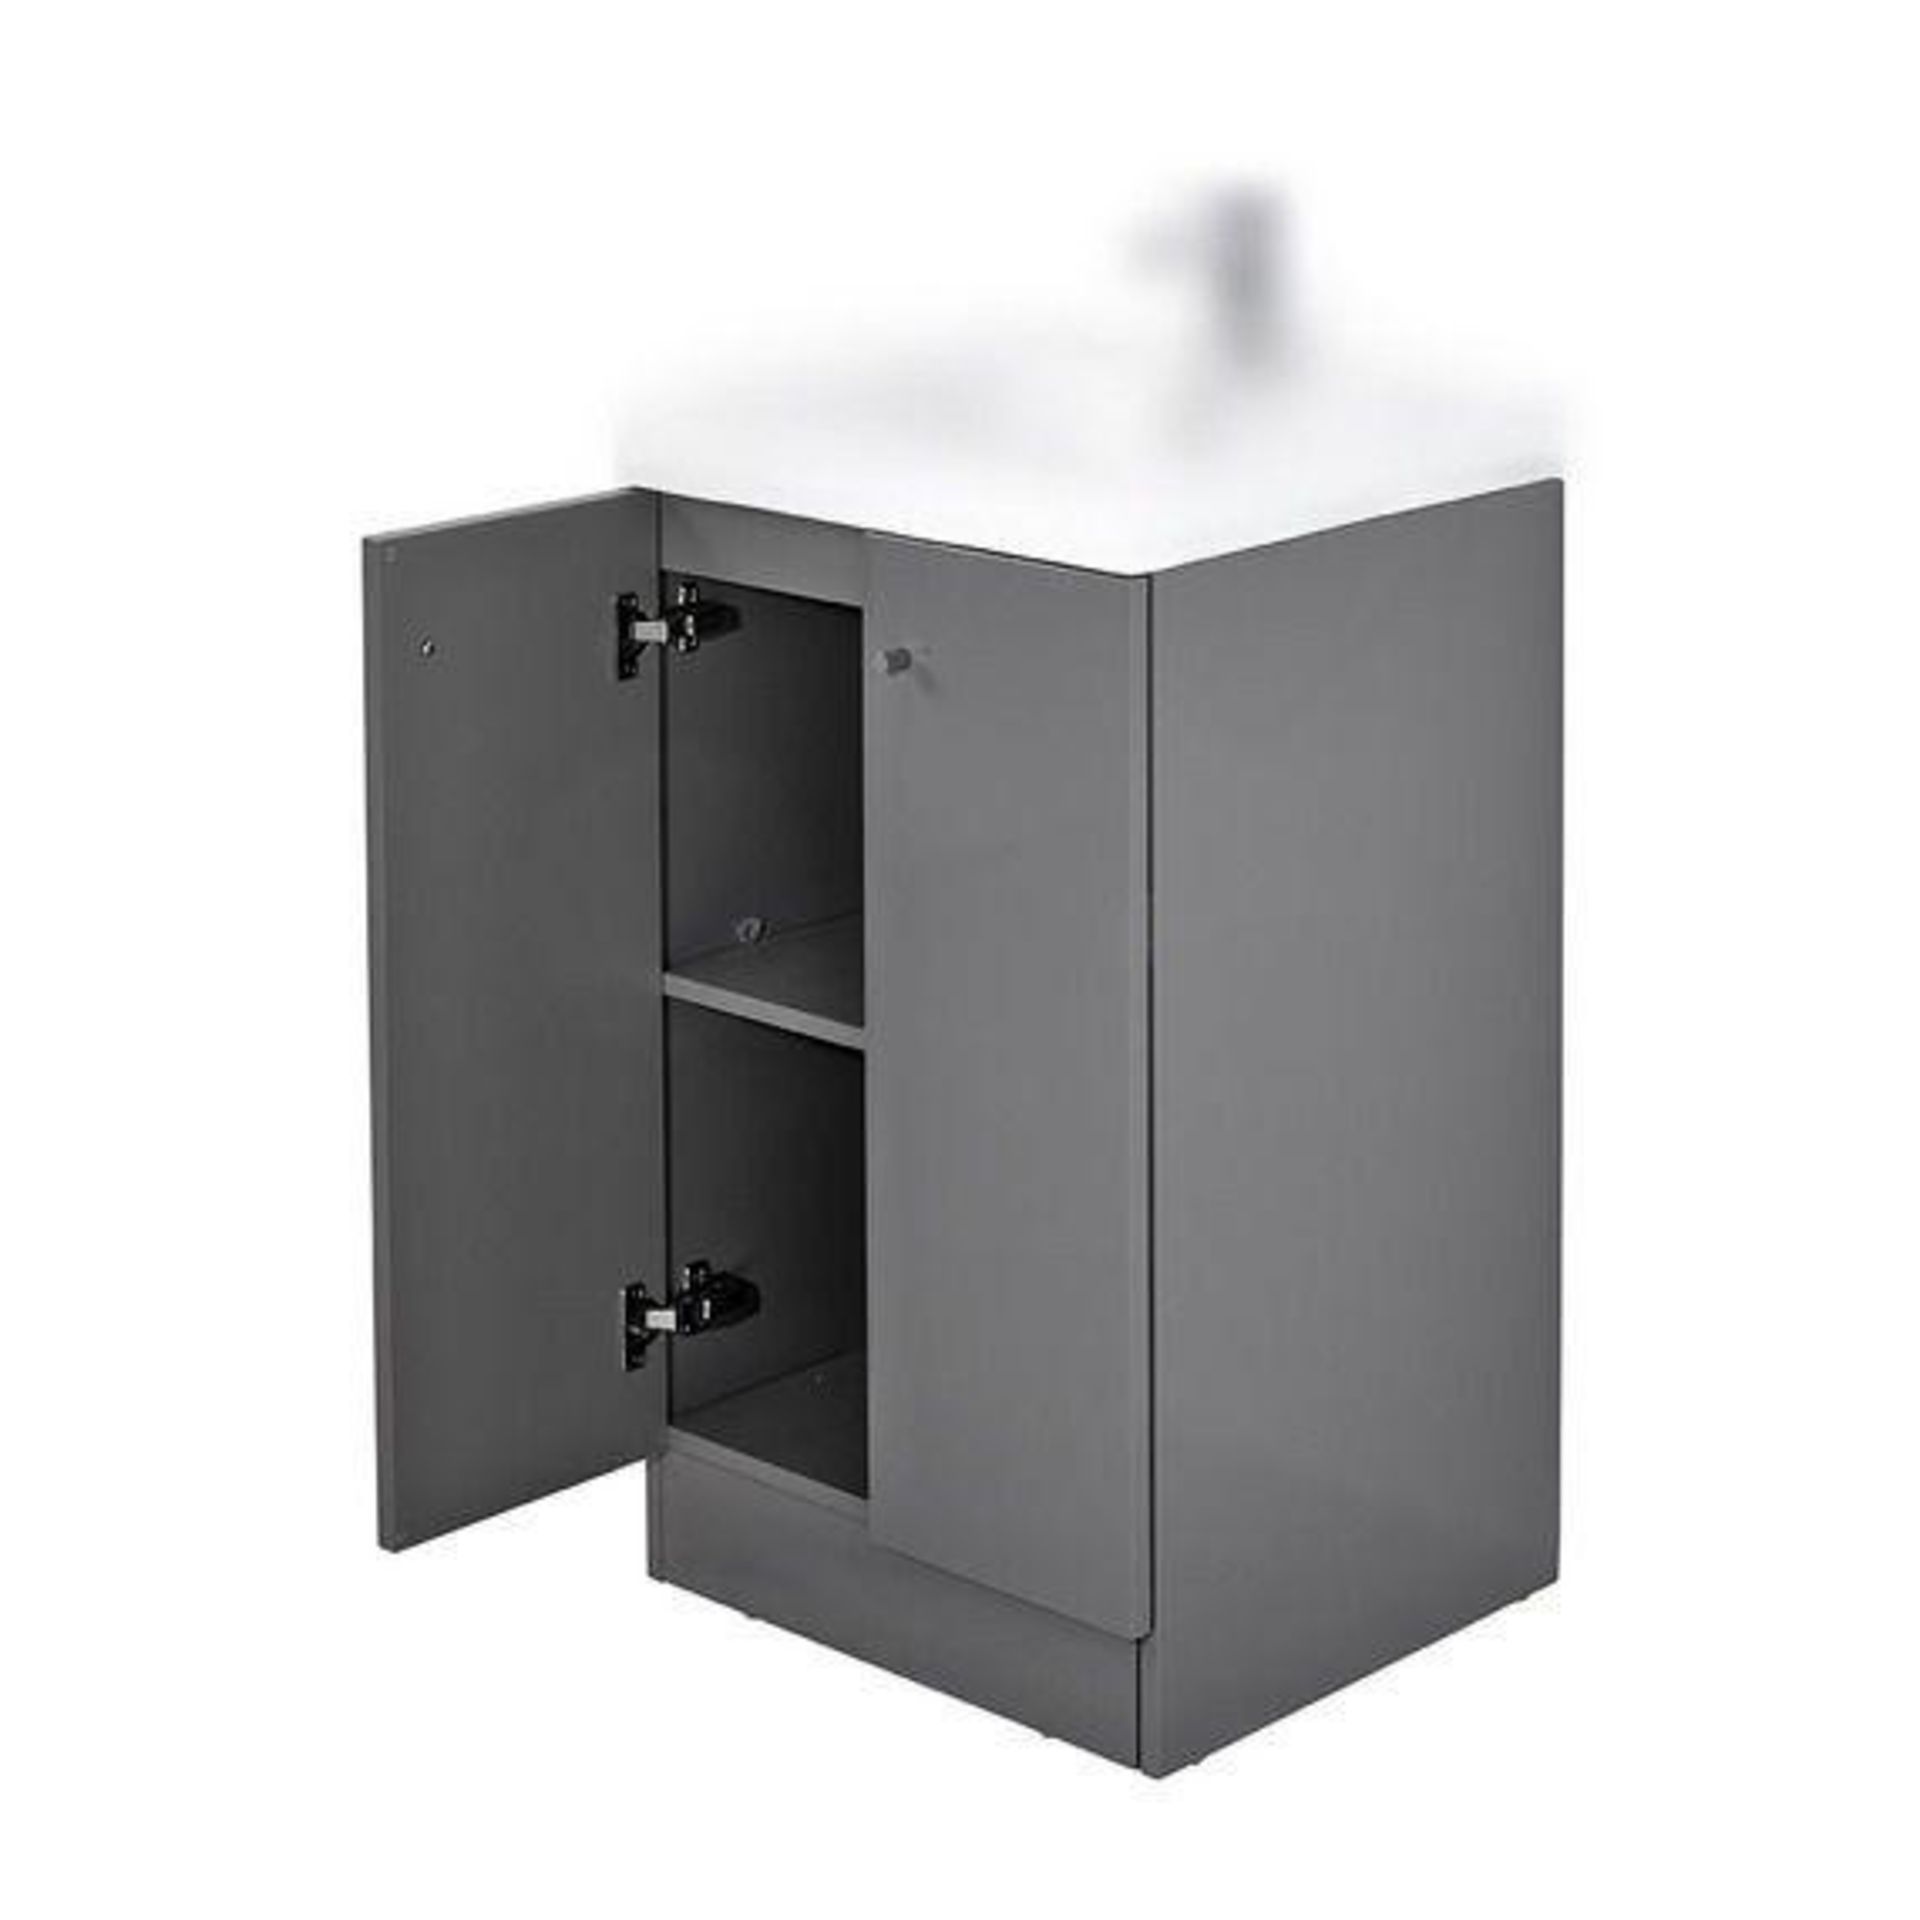 1 x Alpine Duo 500 Floor Standing Vanity Unit - Ultra-Modern Square Design With Soft Close Doors and - Image 2 of 5